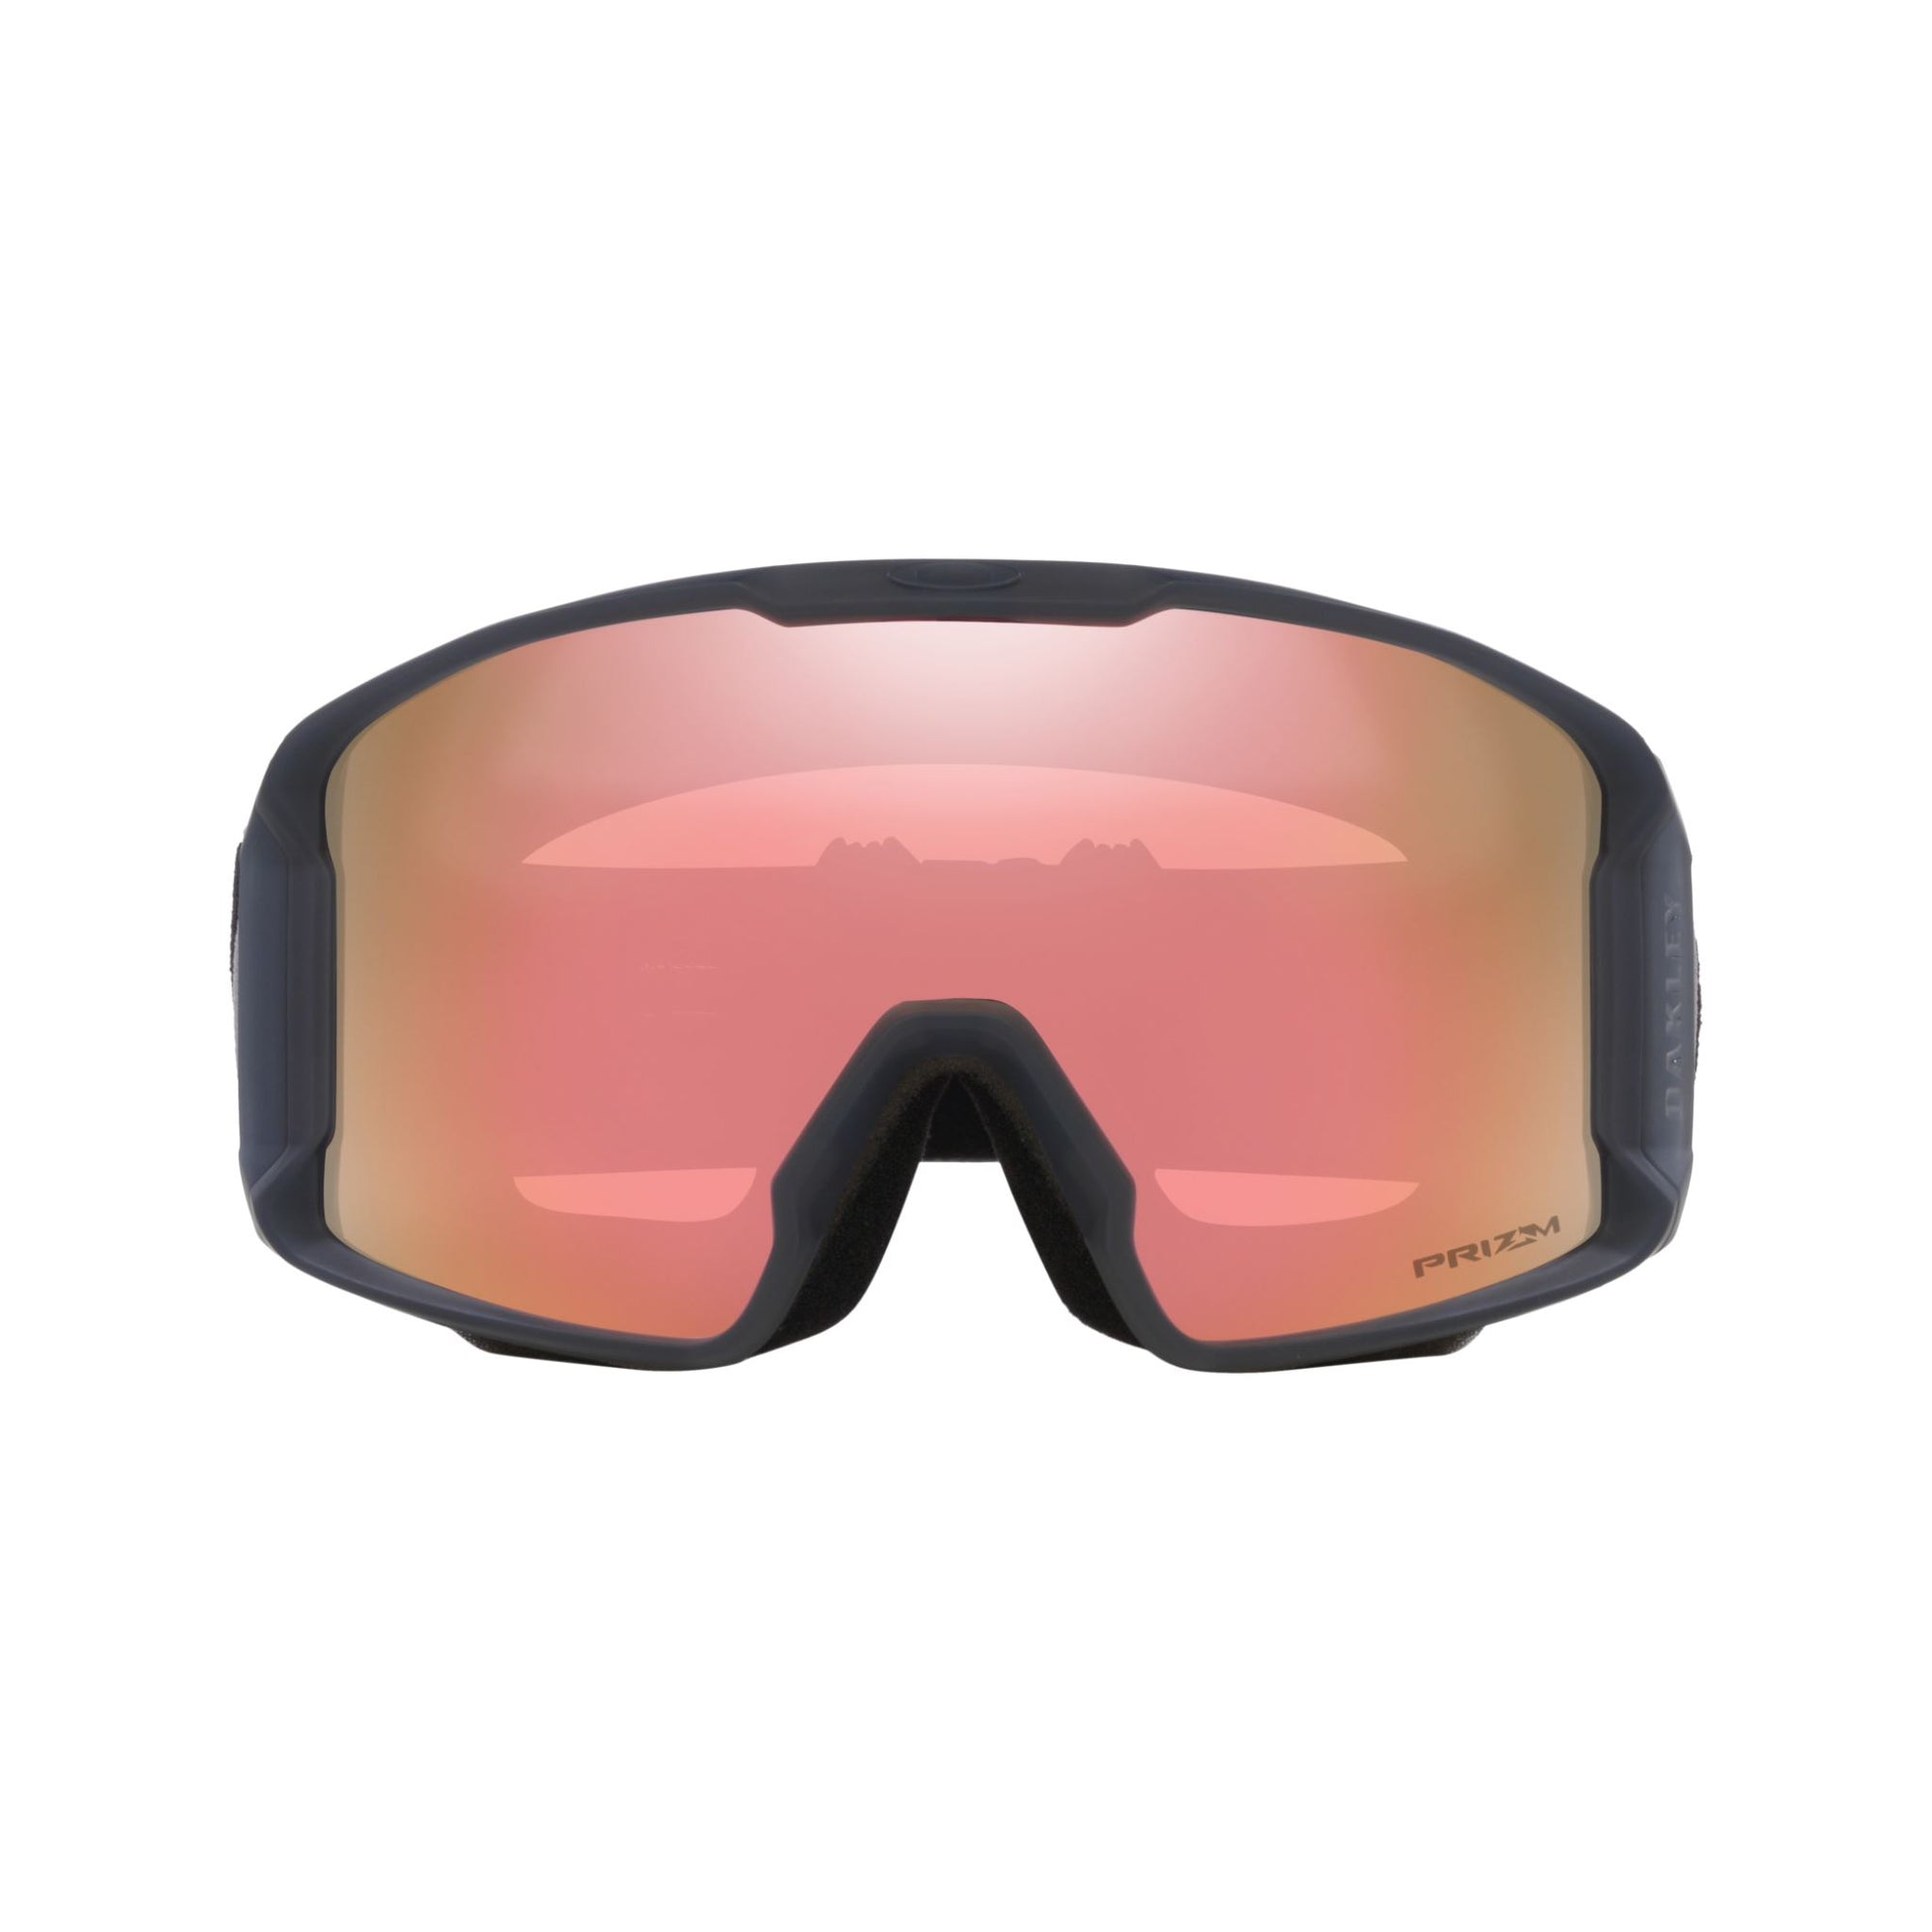 Oakley Line Miner L (Large Fit) Goggle - Forged Iron Prizm Rose Gold Goggles Oakley 